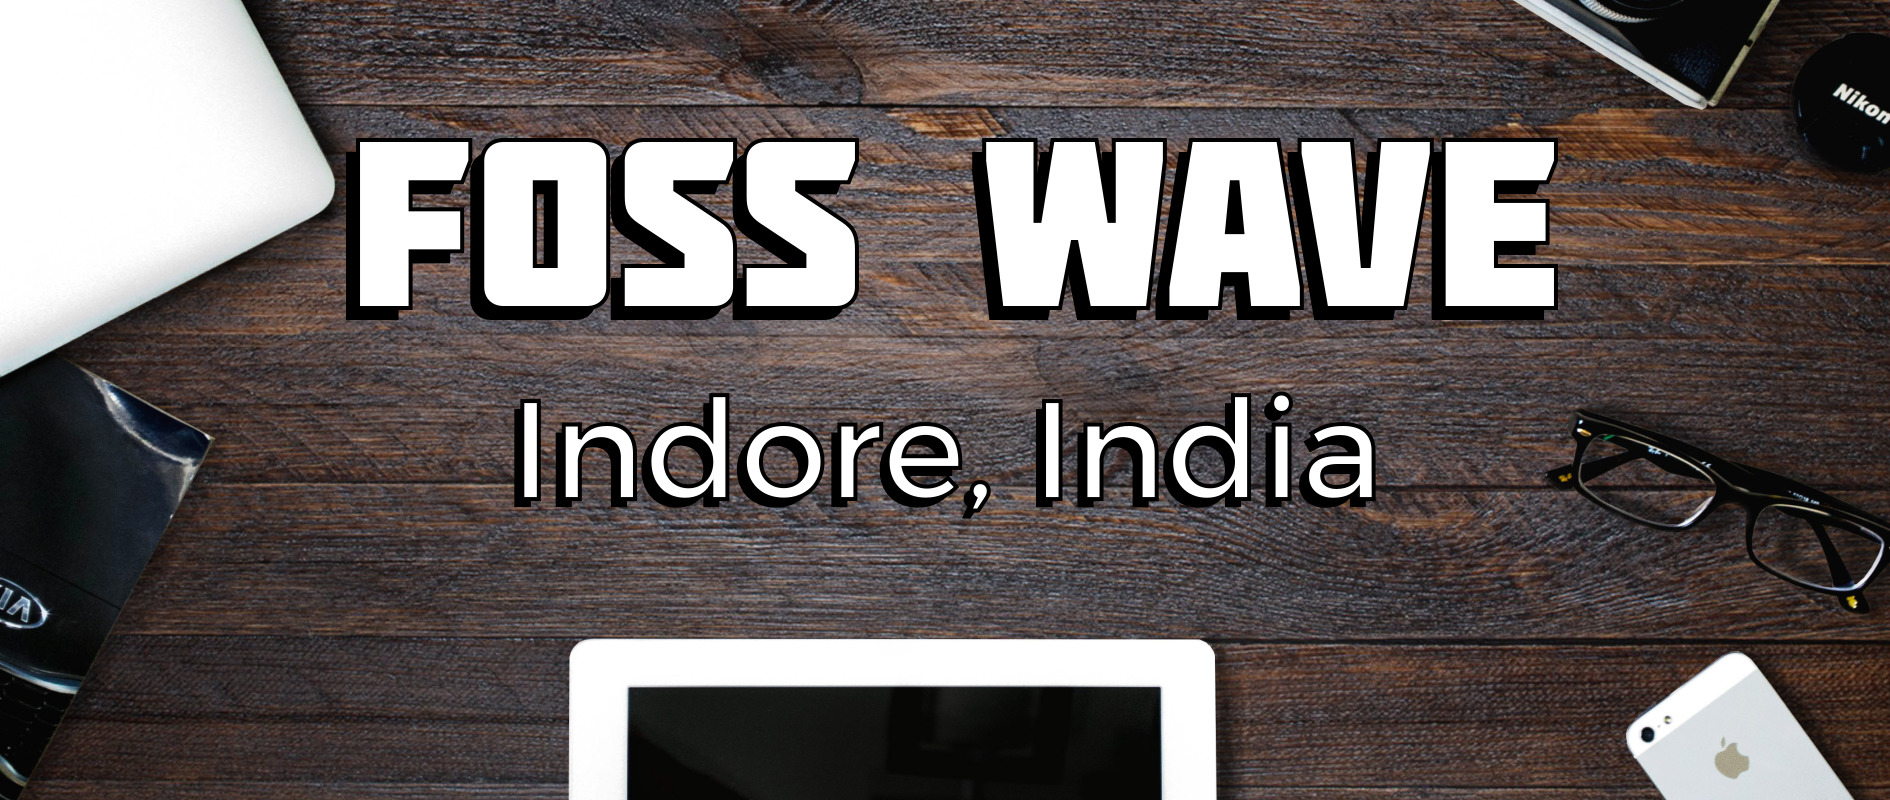 FOSS Wave: Indore, India